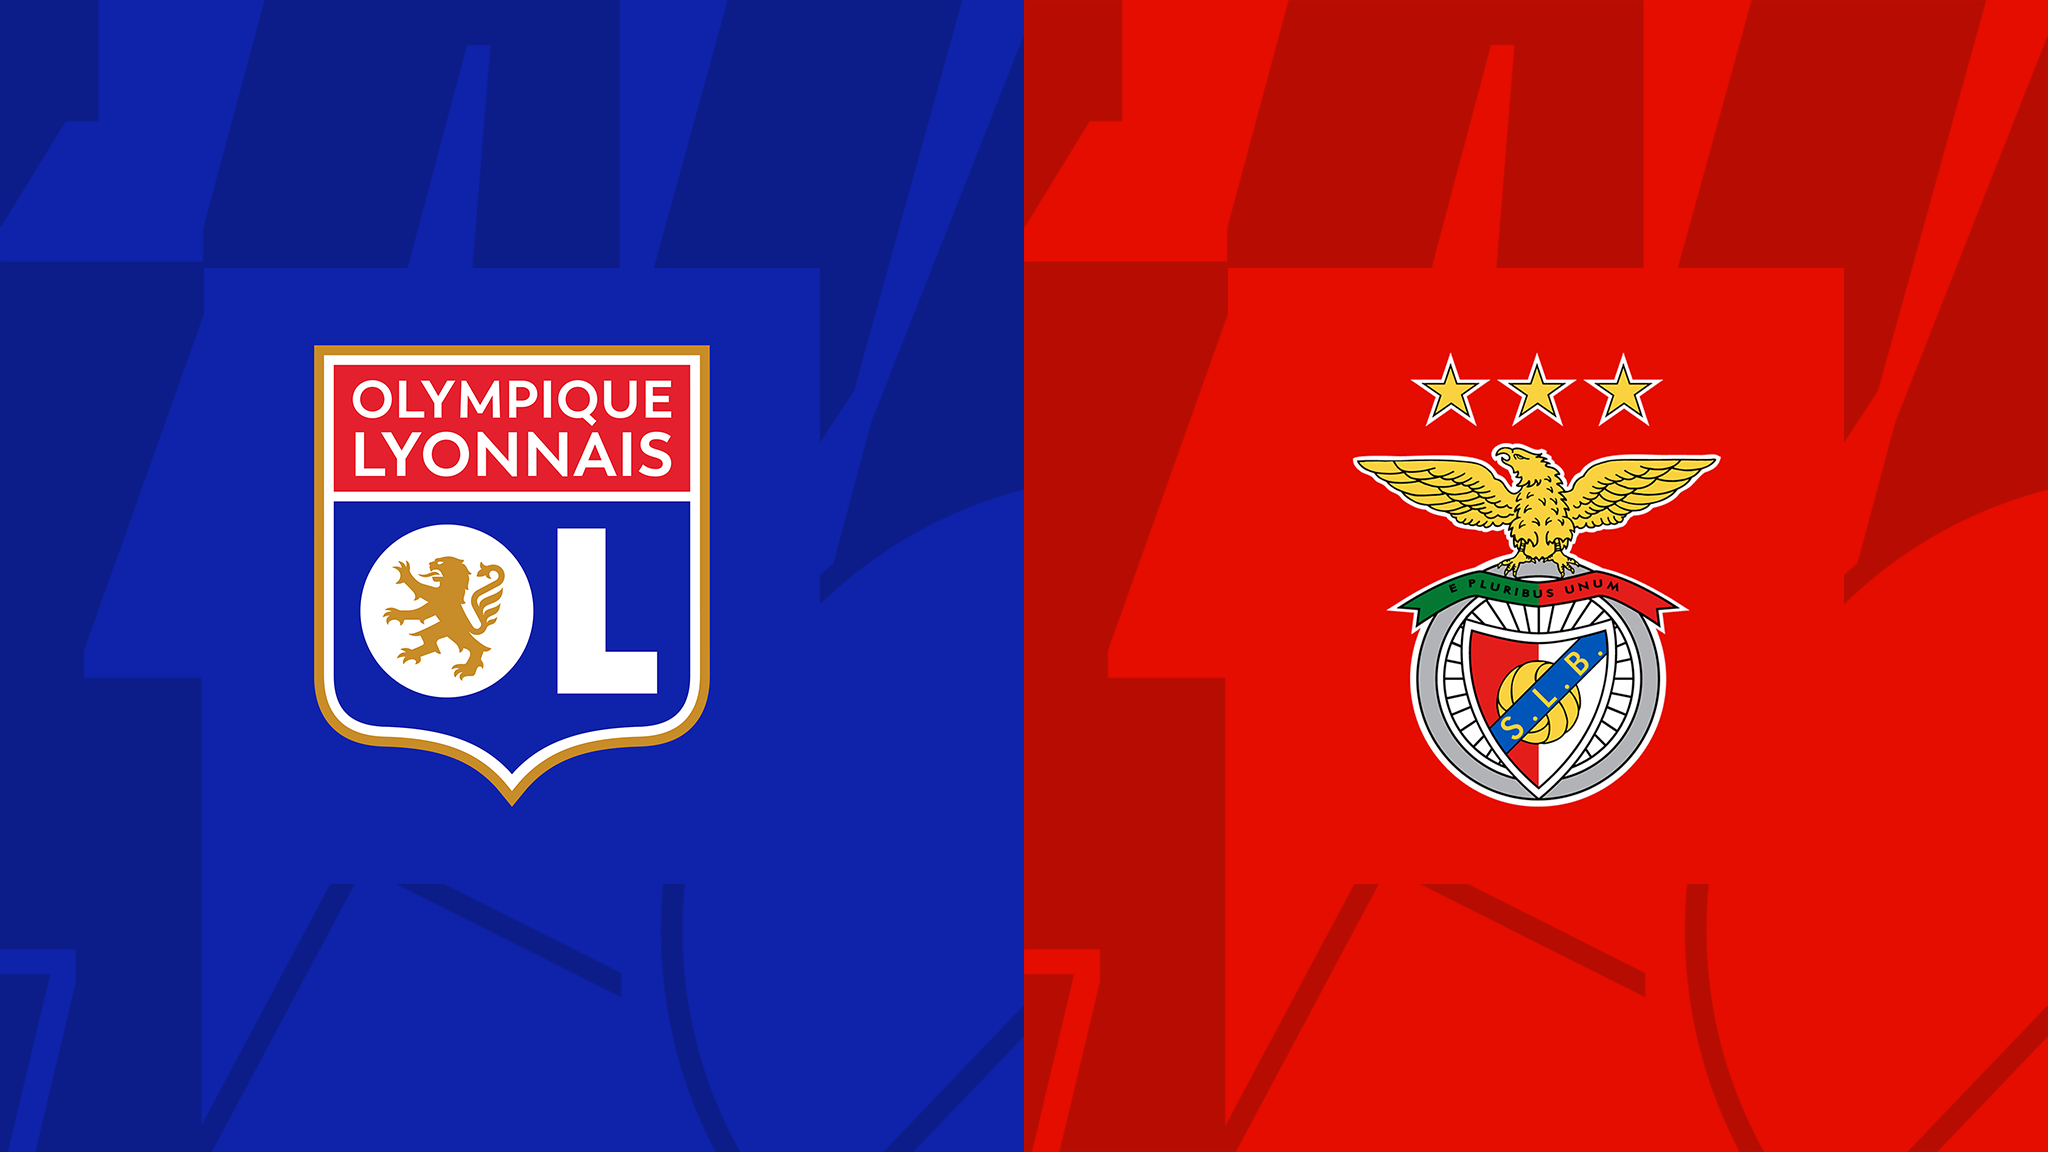 Lyon vs. Benfica: Date, kick-off time and how to watch UEFA Women's Champions League quarter-final match